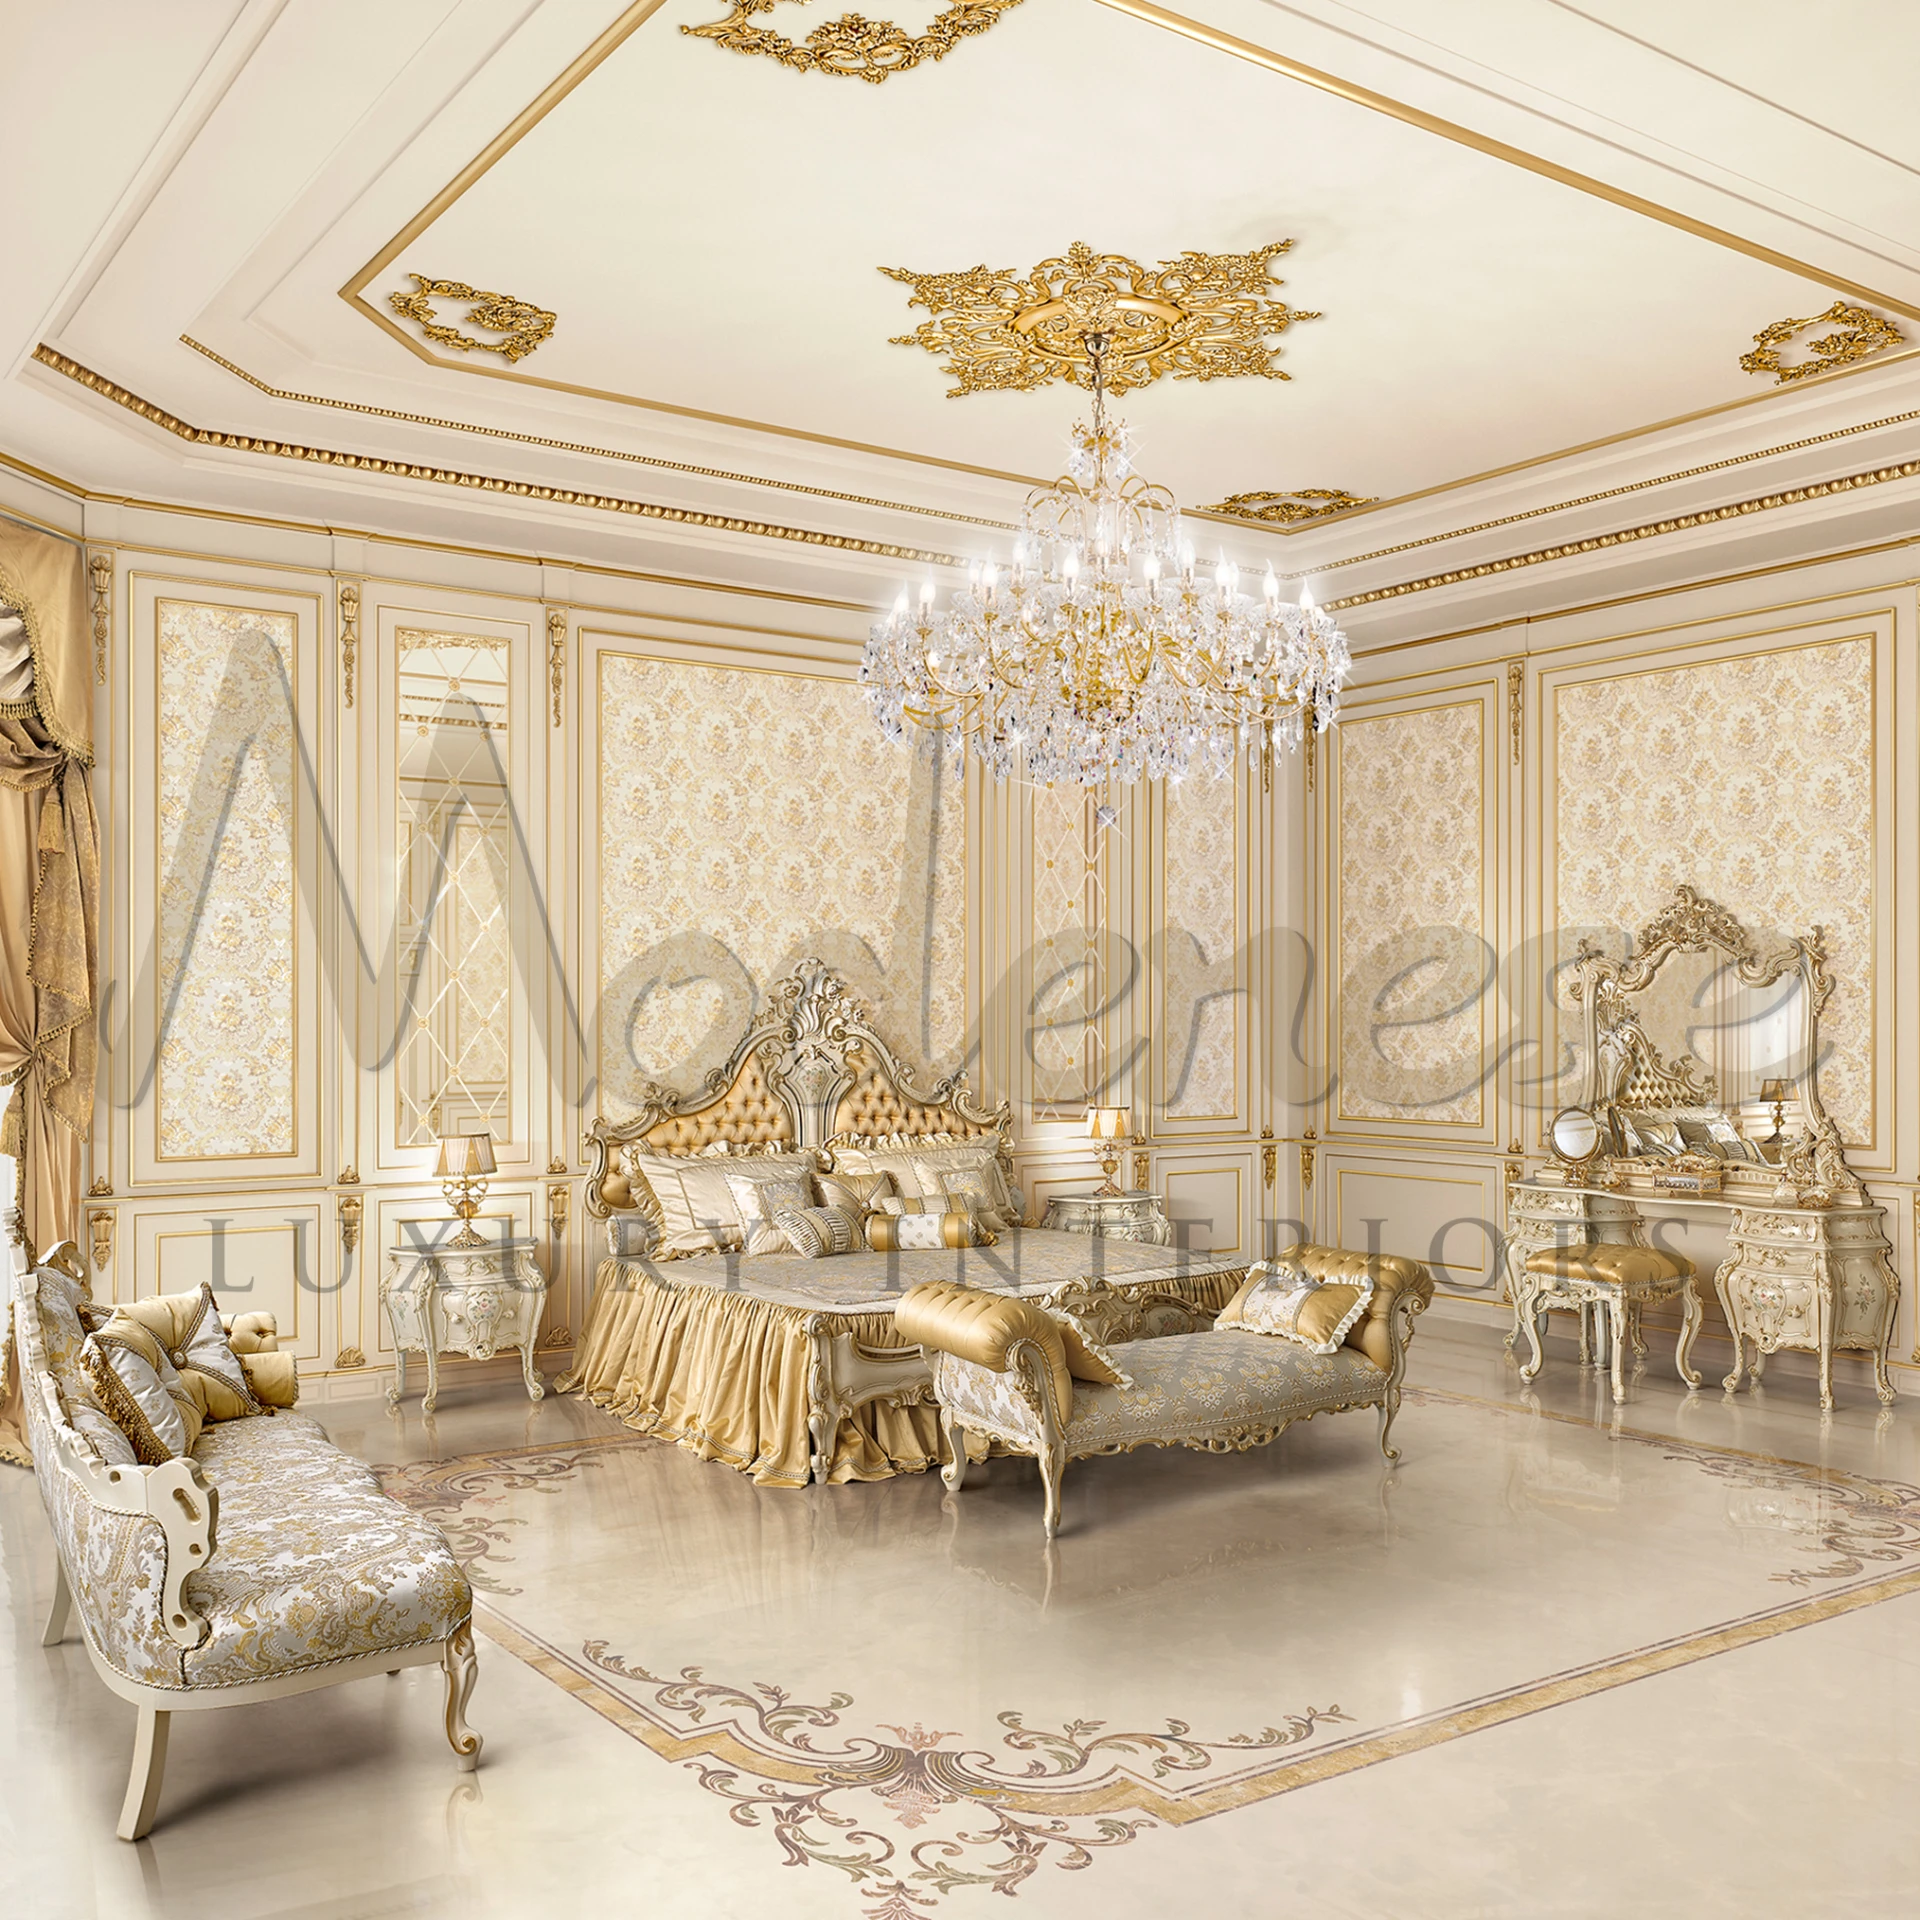 Luxury classic elegant carved bench in gold with luxurious patterned upholstery and accent pillows.                                                                        